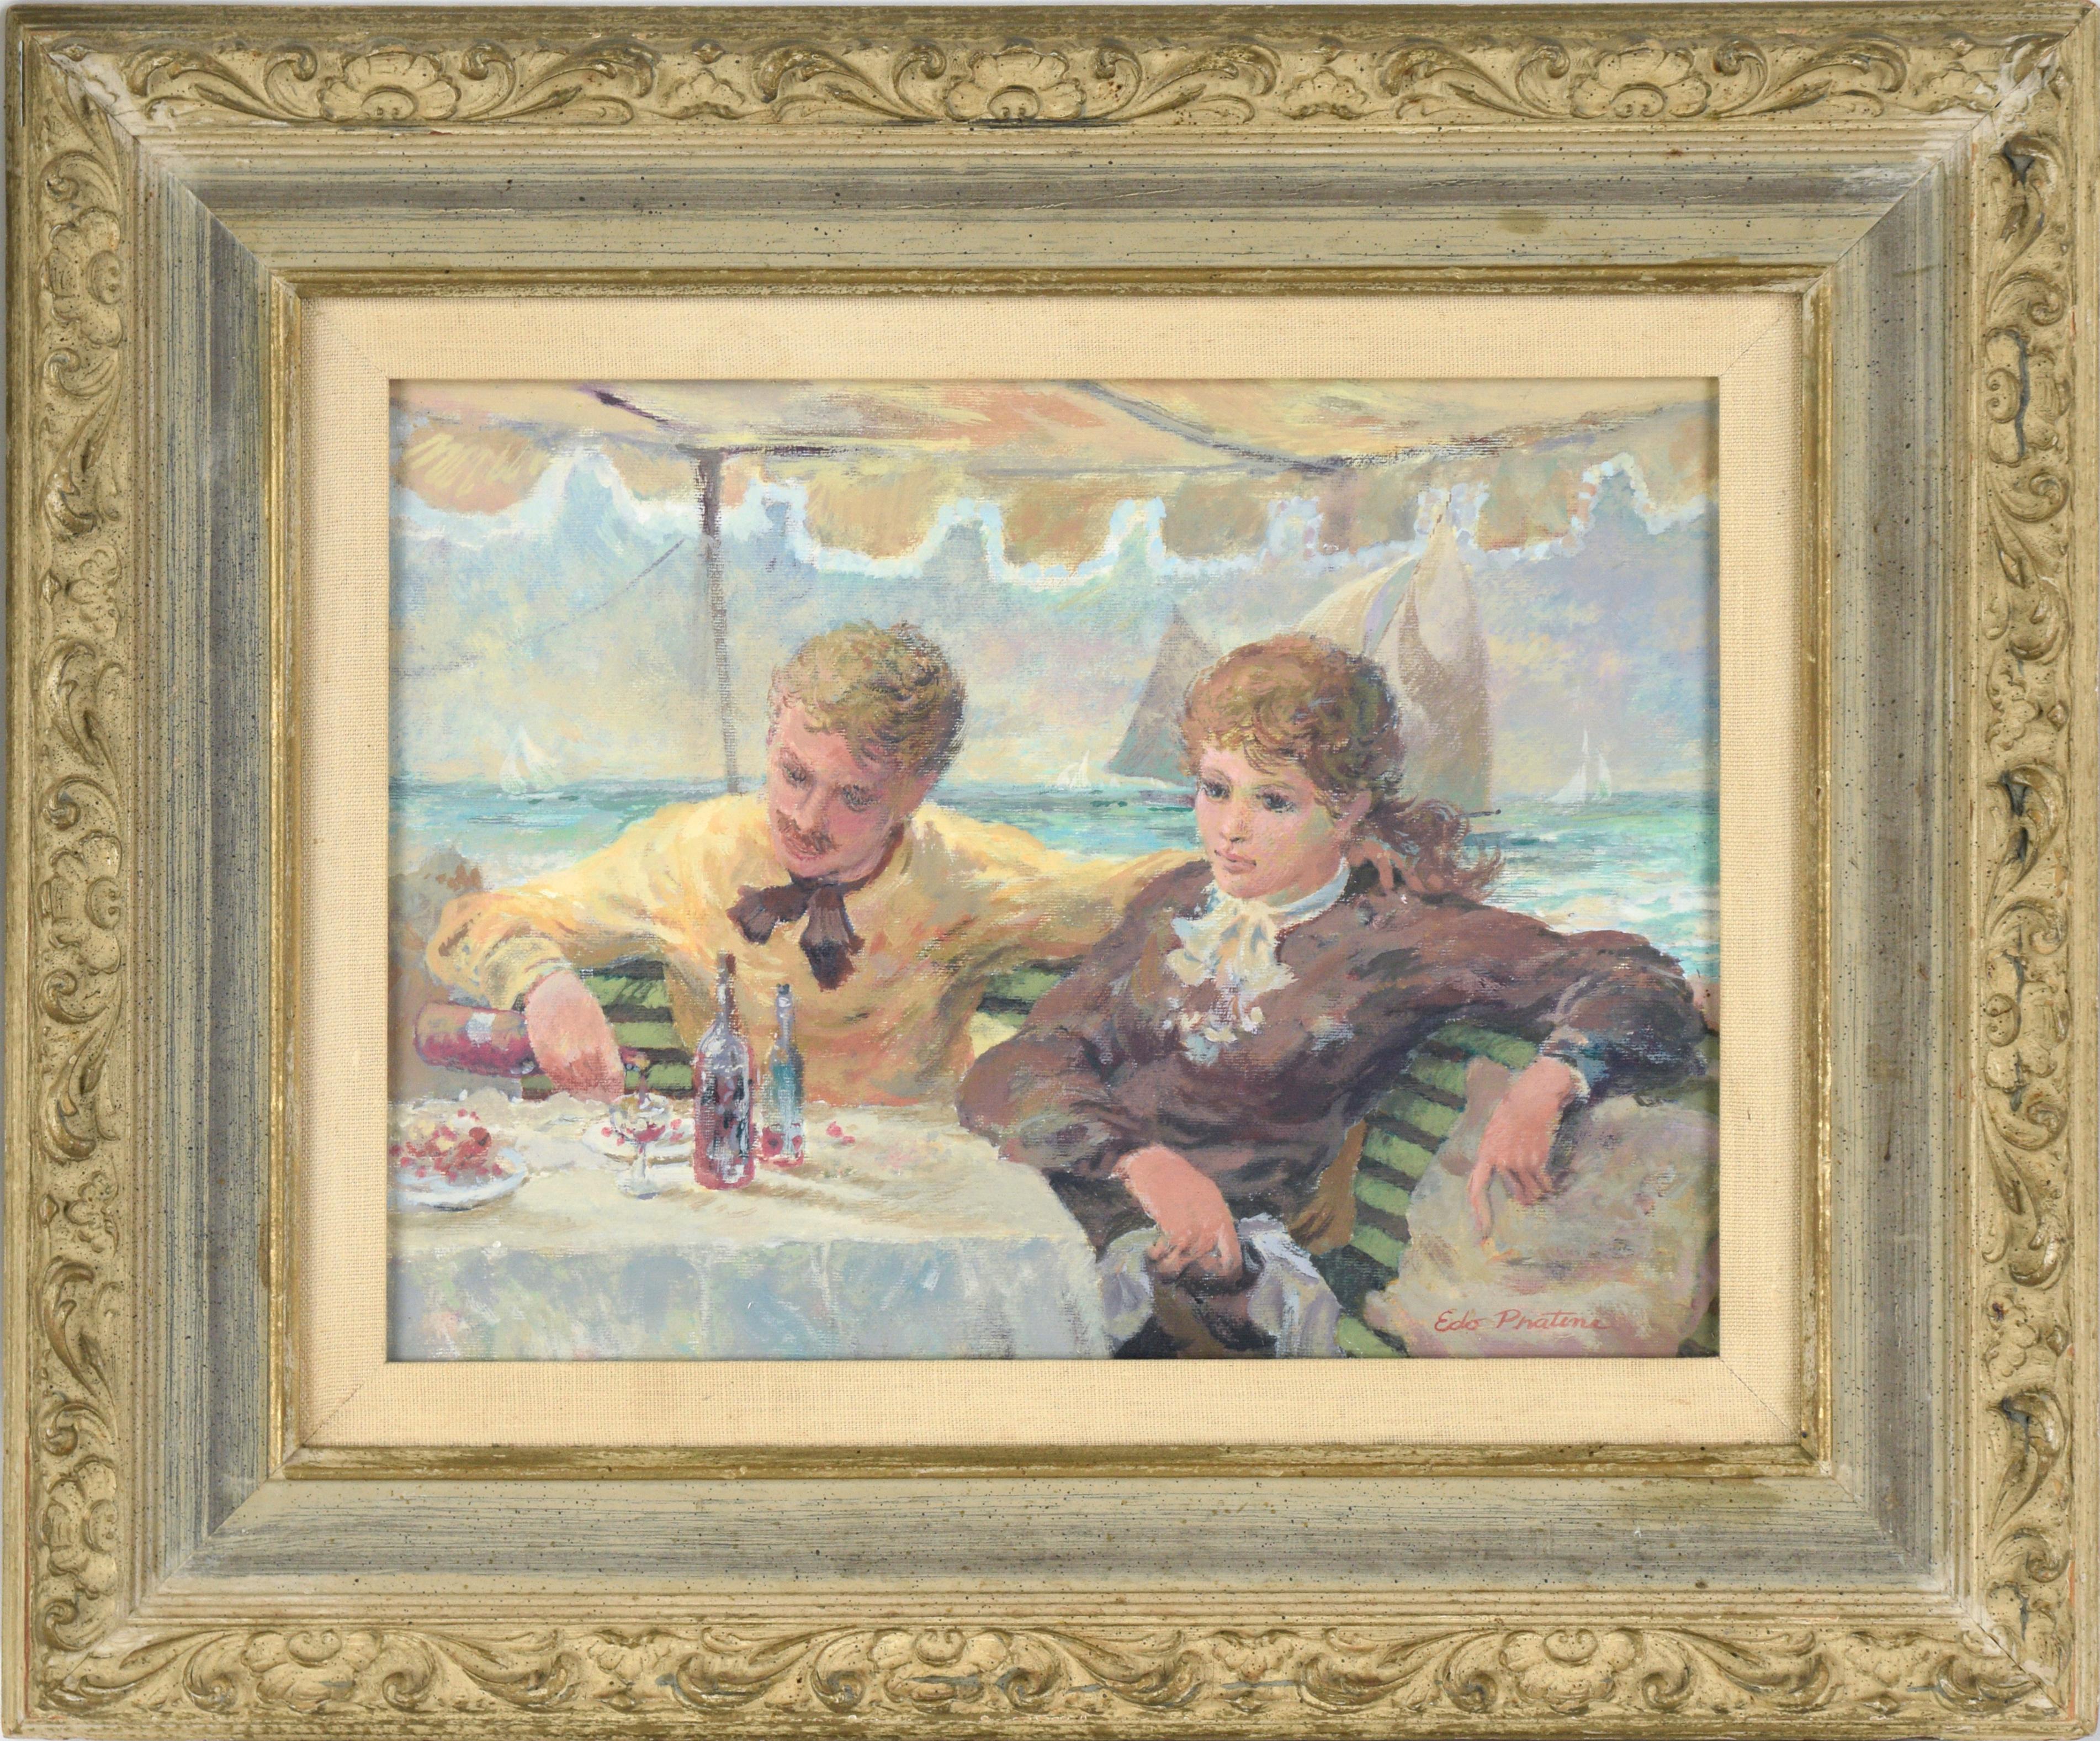 Edo Pratini Figurative Painting - "Boating Party" - Portrait of a Couple at Lunch on the coast in Brittany France 